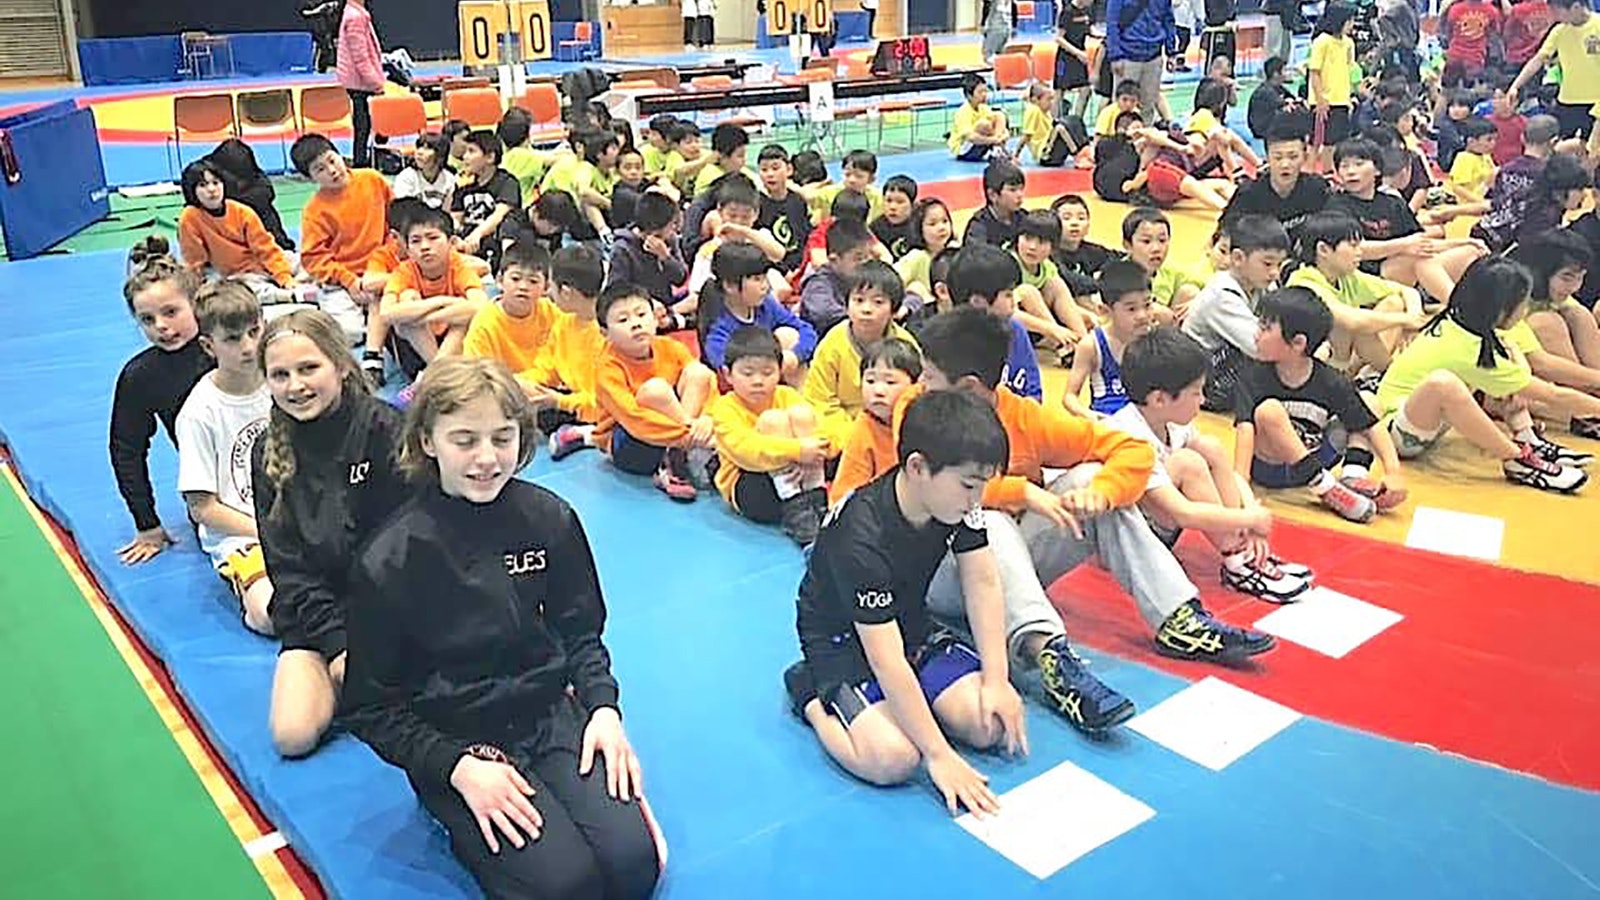 A 10-year-old Tai Mc Bride, last in near row, takes part in wrestling seminar in Japan.